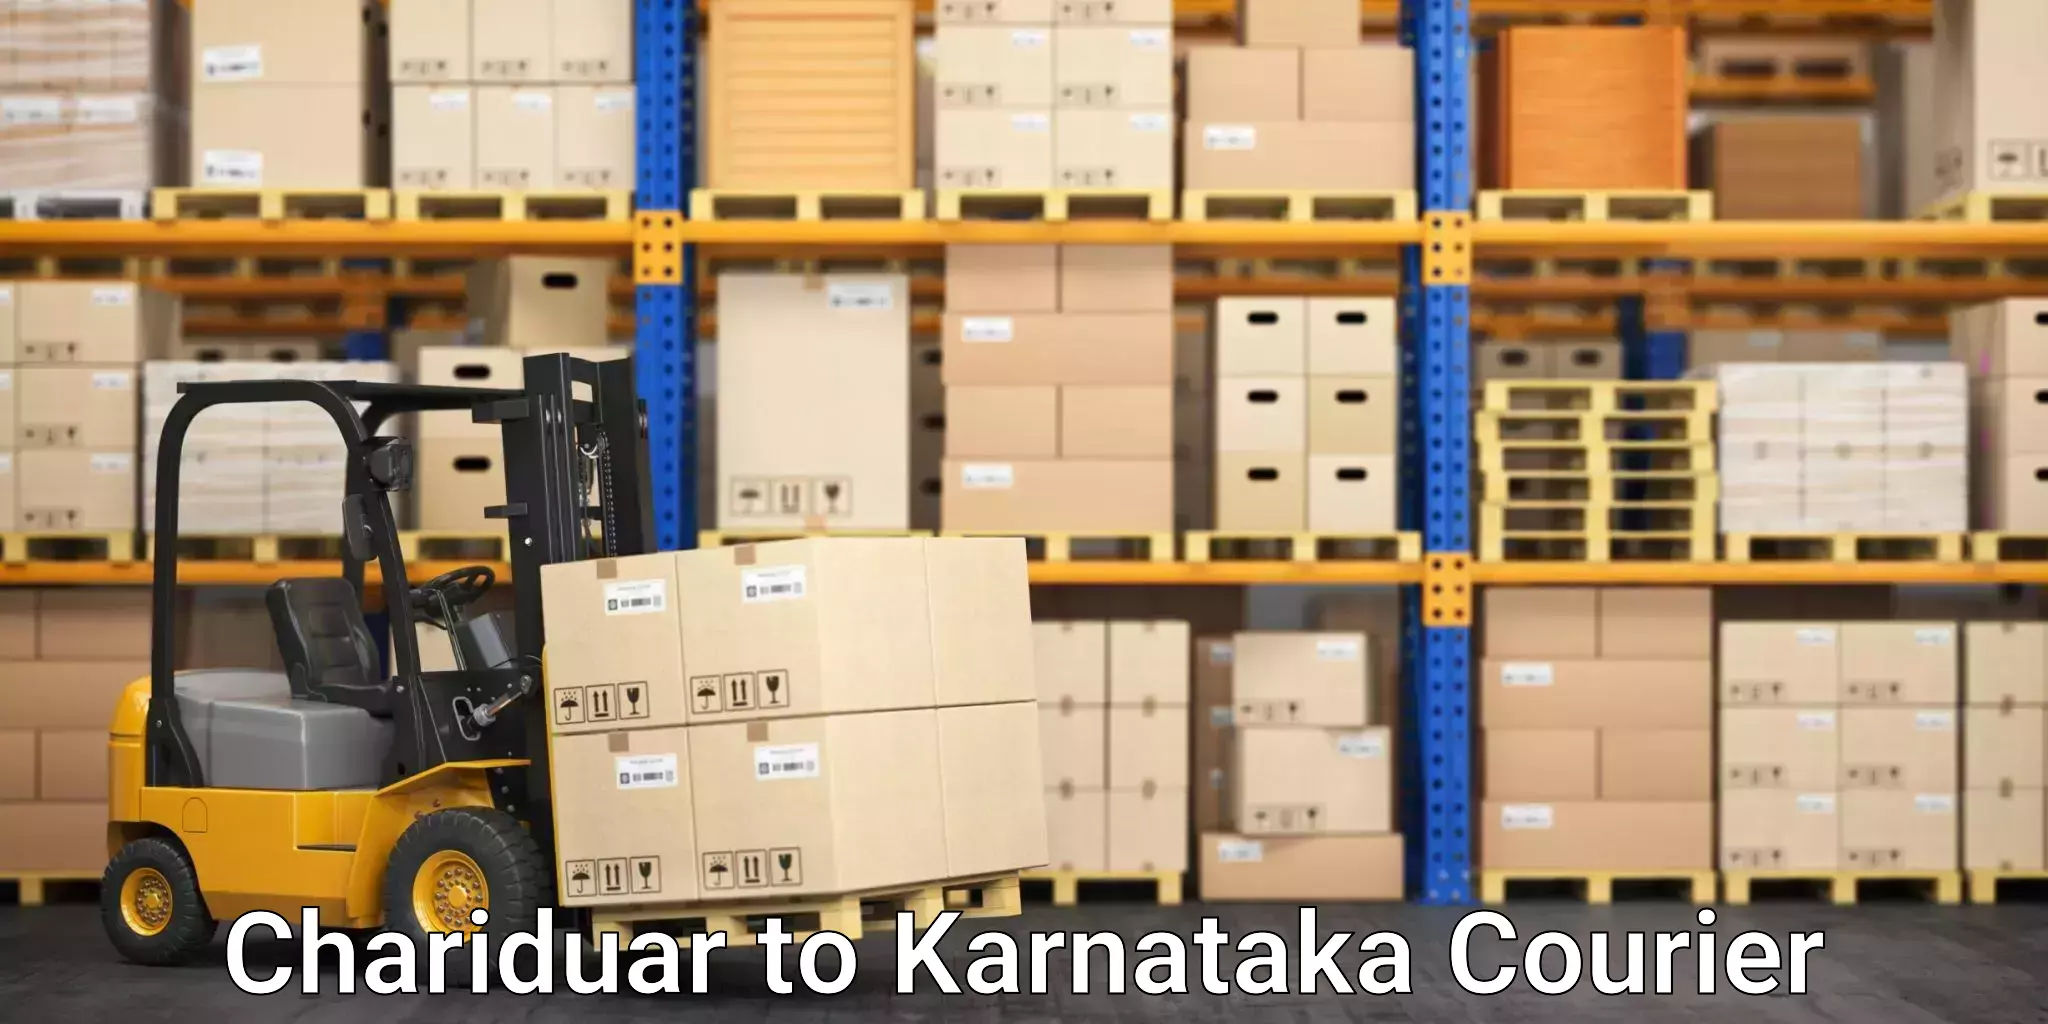 Efficient order fulfillment in Chariduar to Manipal